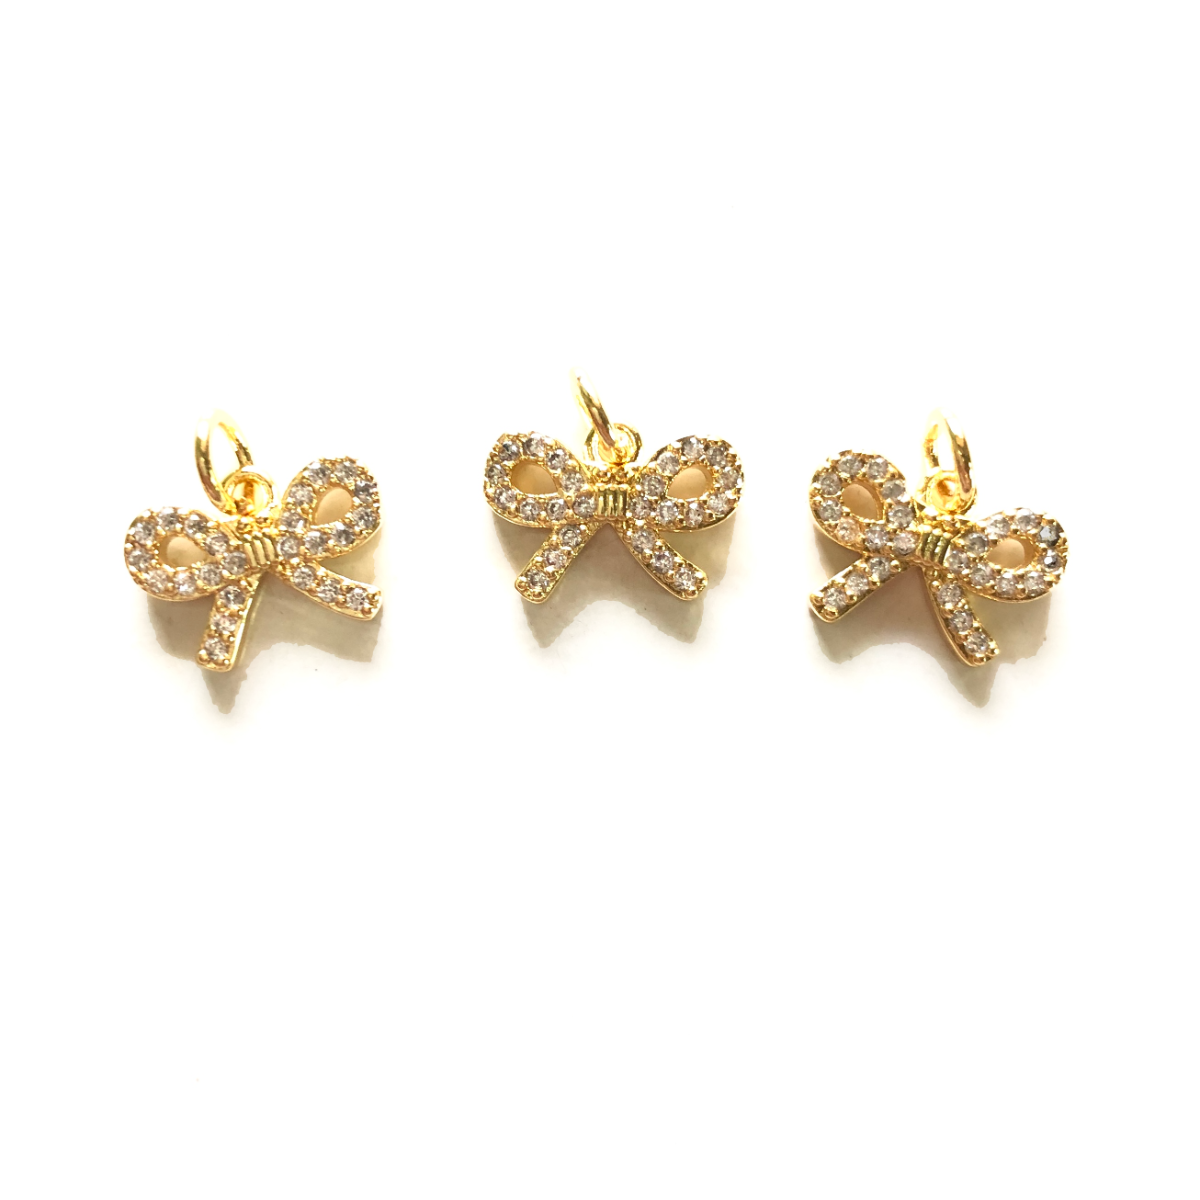 10pcs/lot 12.3*9mm Small Size CZ Pave Bow Tie Charms Gold CZ Paved Charms Bow Ties Small Sizes Charms Beads Beyond